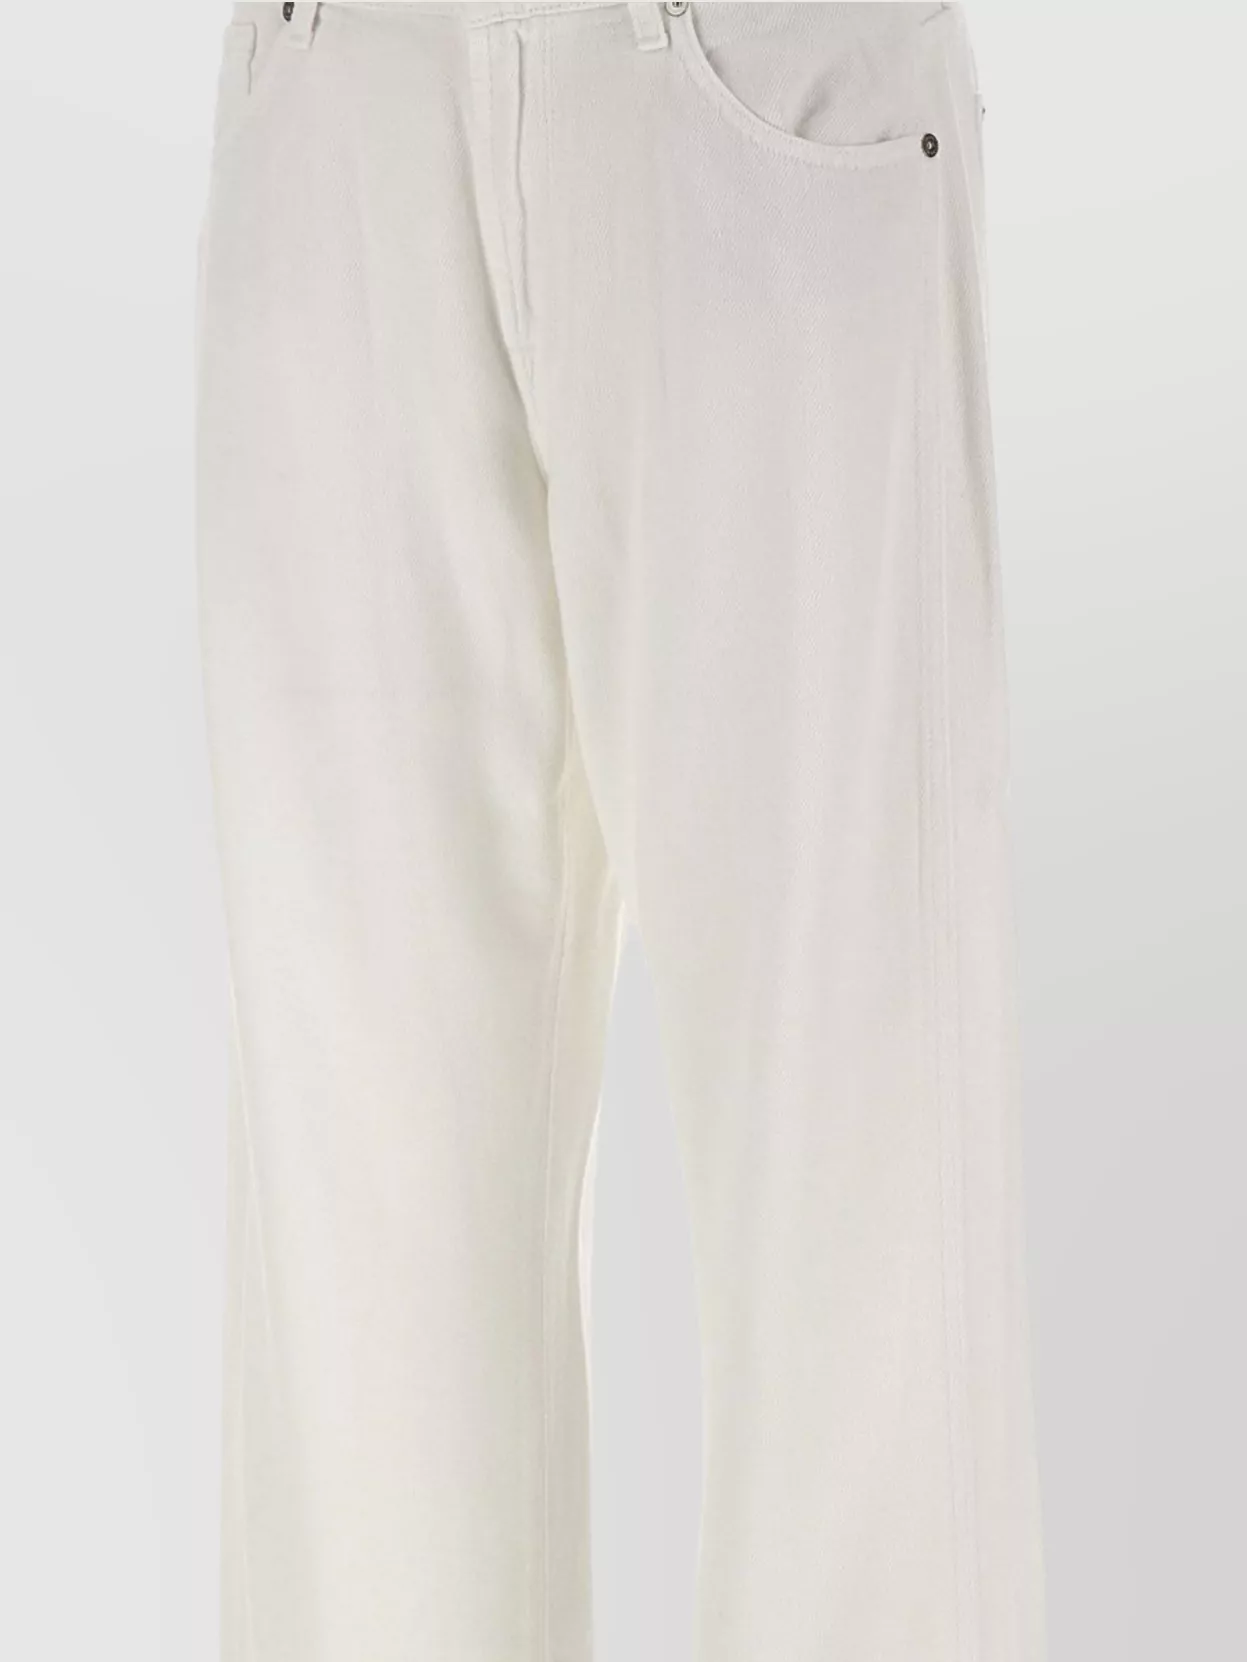 7 For All Mankind Tess Flare Leg High Waist Trousers In White